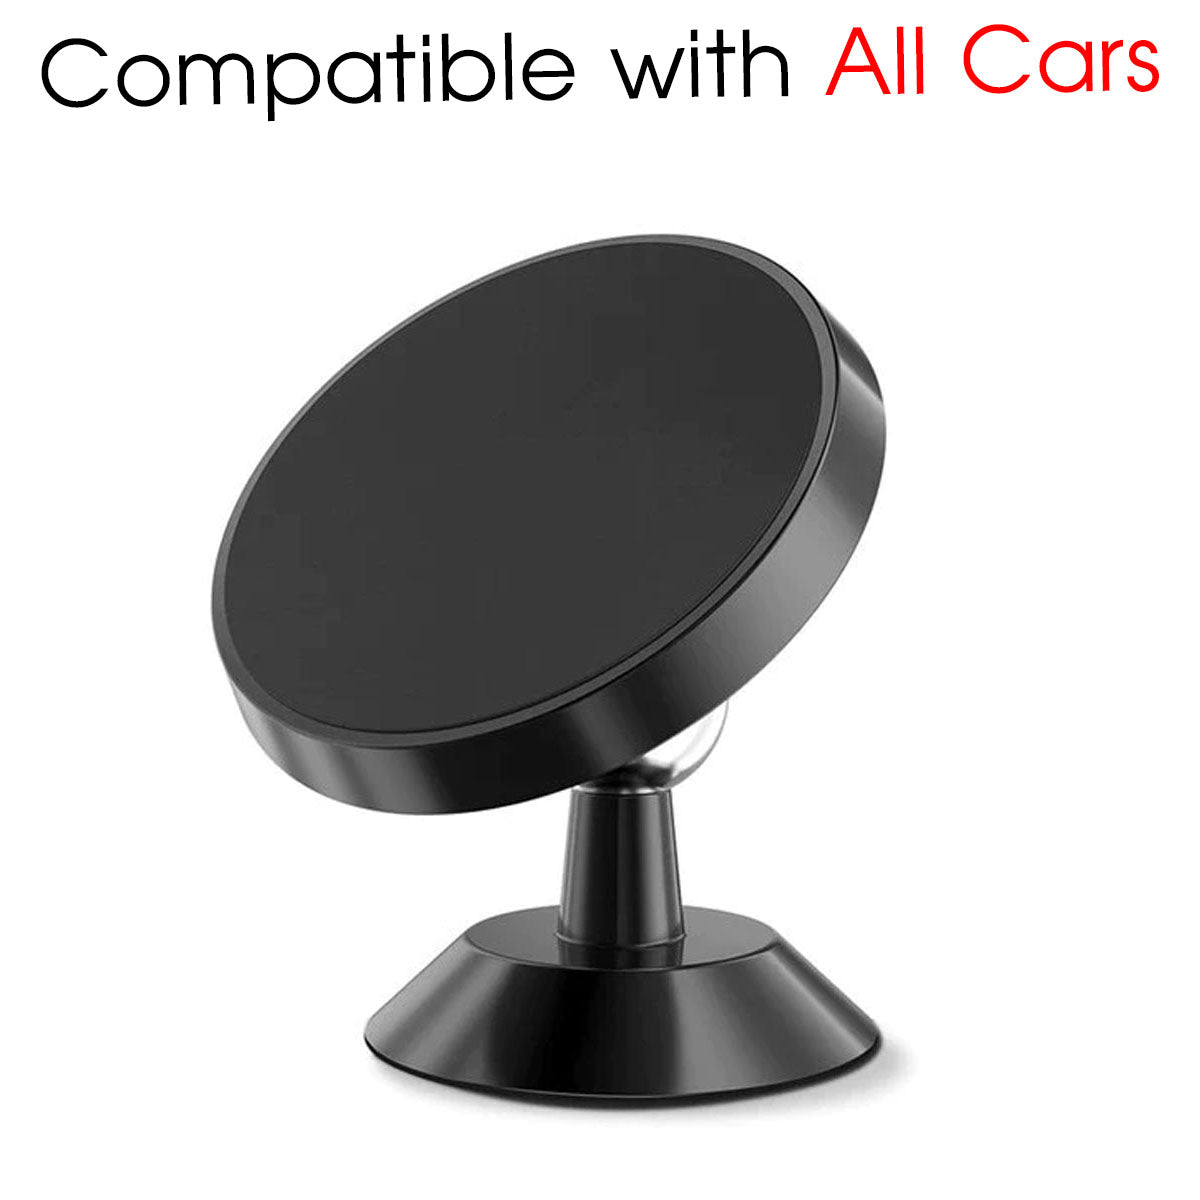 [2 Pack ] Magnetic Phone Mount, Custom For Your Cars, [ Super Strong Magnet ] [ with 4 Metal Plate ] car Magnetic Phone Holder, [ 360° Rotation ] Universal Dashboard car Mount Fits All Cell Phones, Car Accessories MS13982